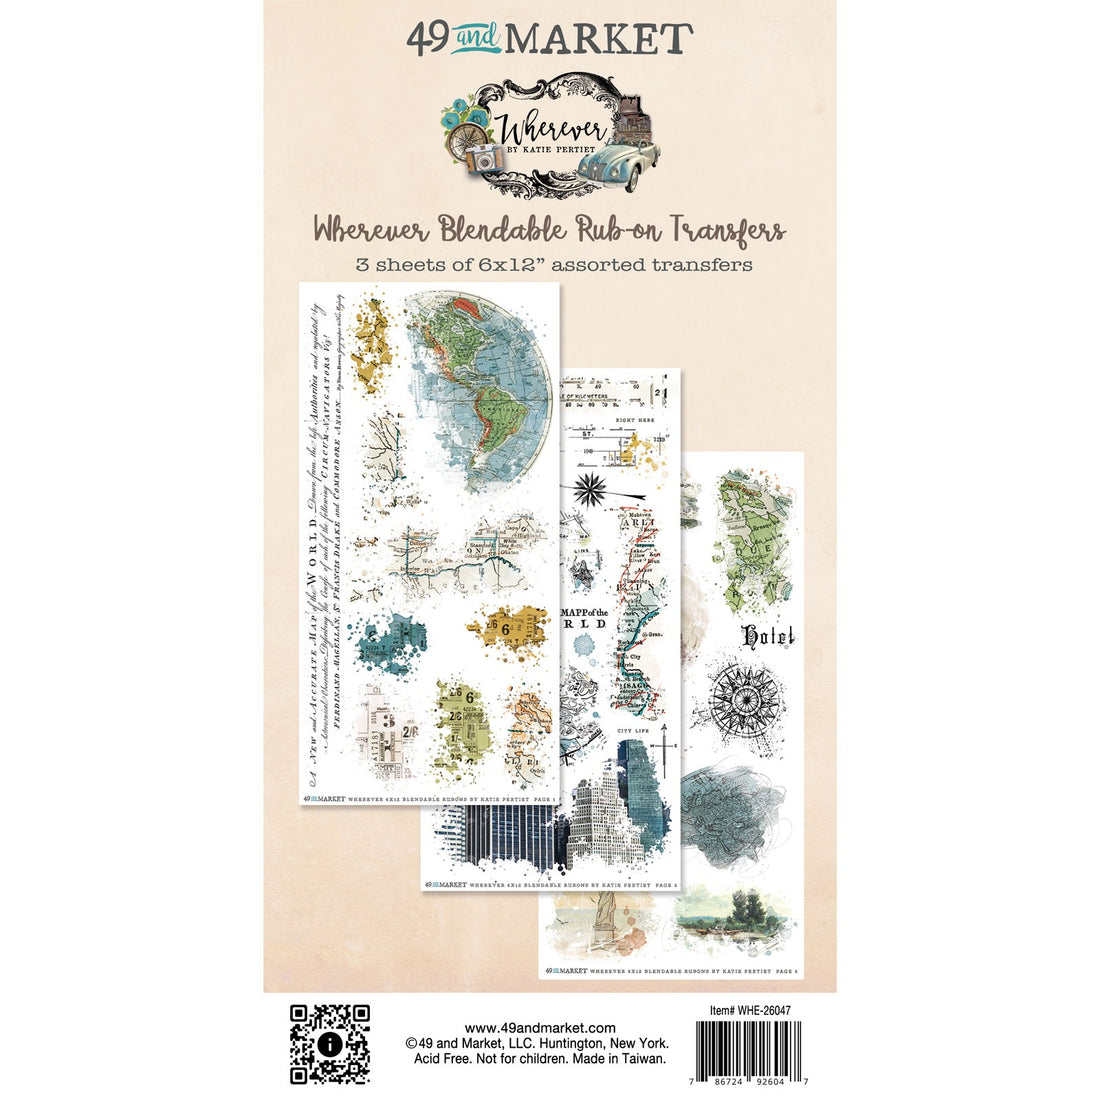 49 and Market WHEREVER BLENDABLE RUB-ON TRANSFERS 3 Sheets